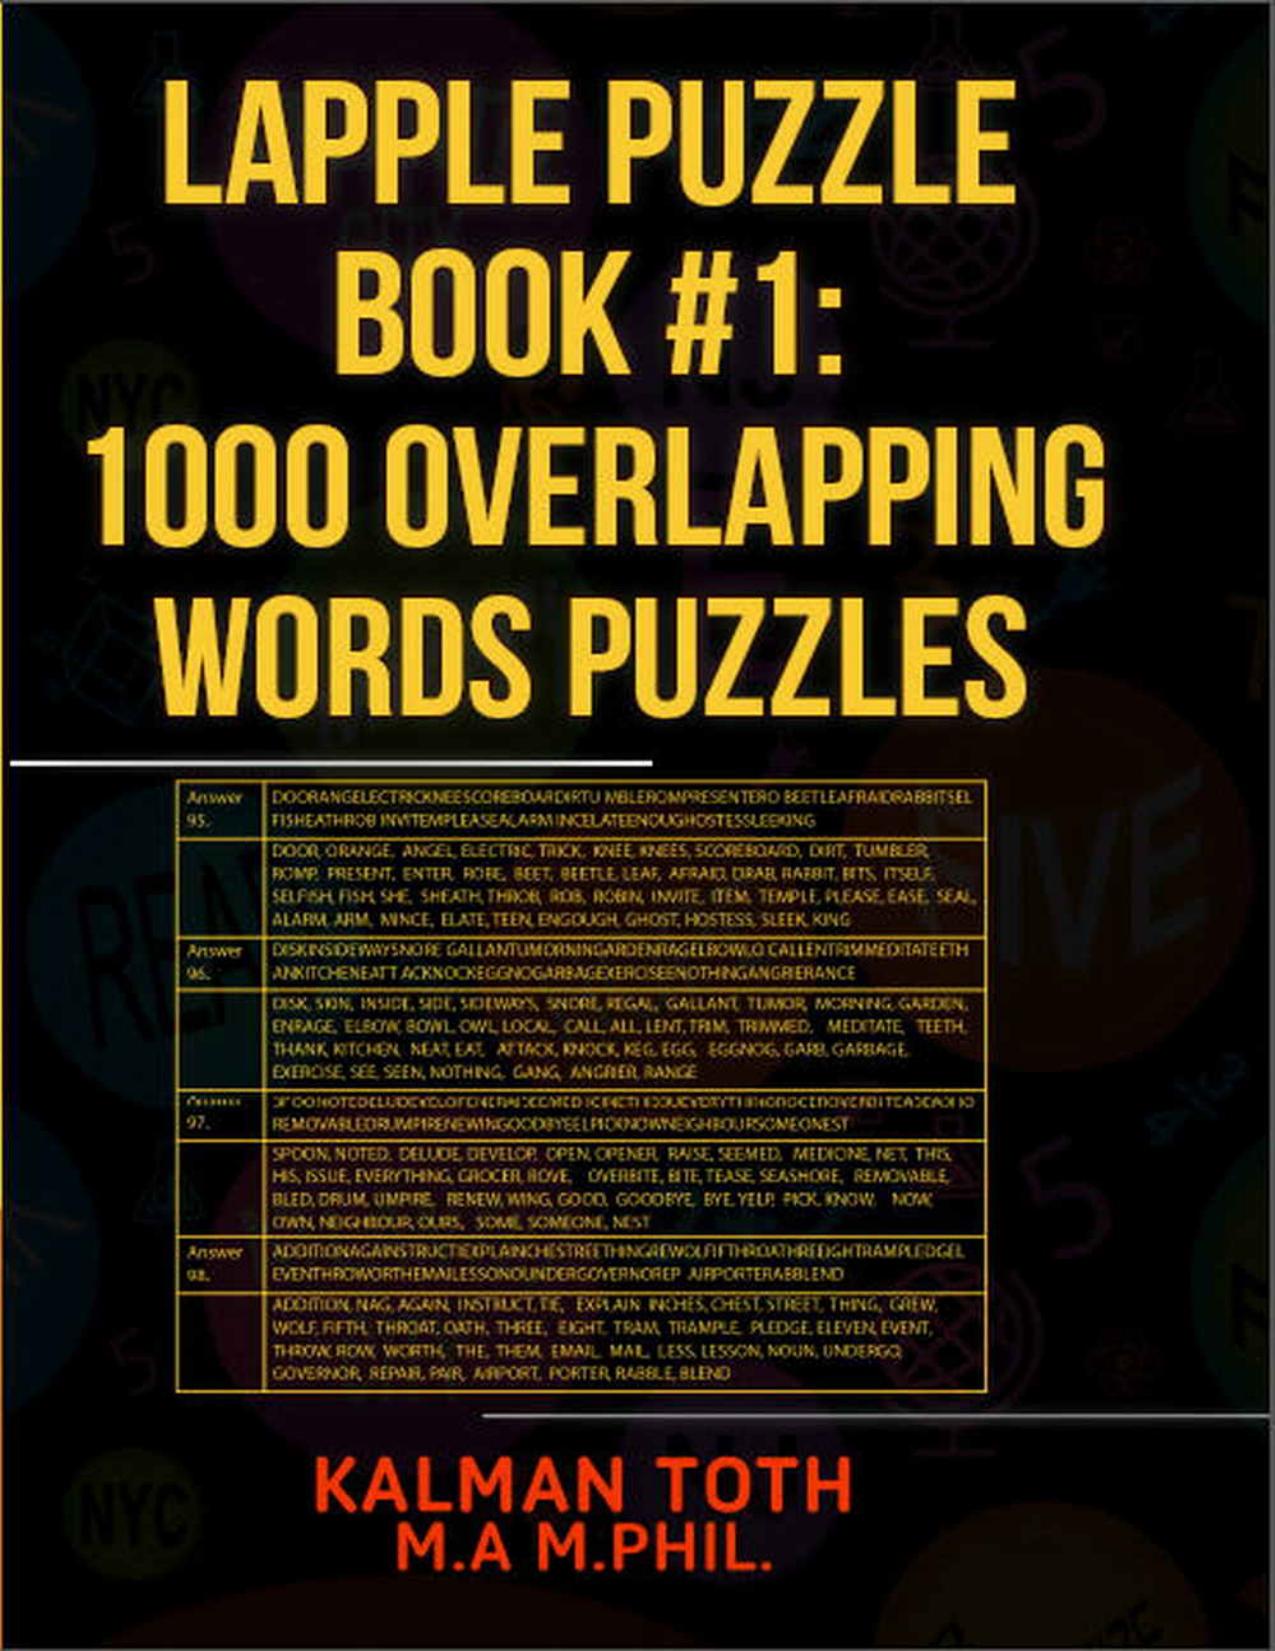 Lapple Puzzle Book #1: 1000 Overlapping Words Puzzles (LAPPLE IQ PUZZLES) by Kalman Toth M.A. M.PHIL